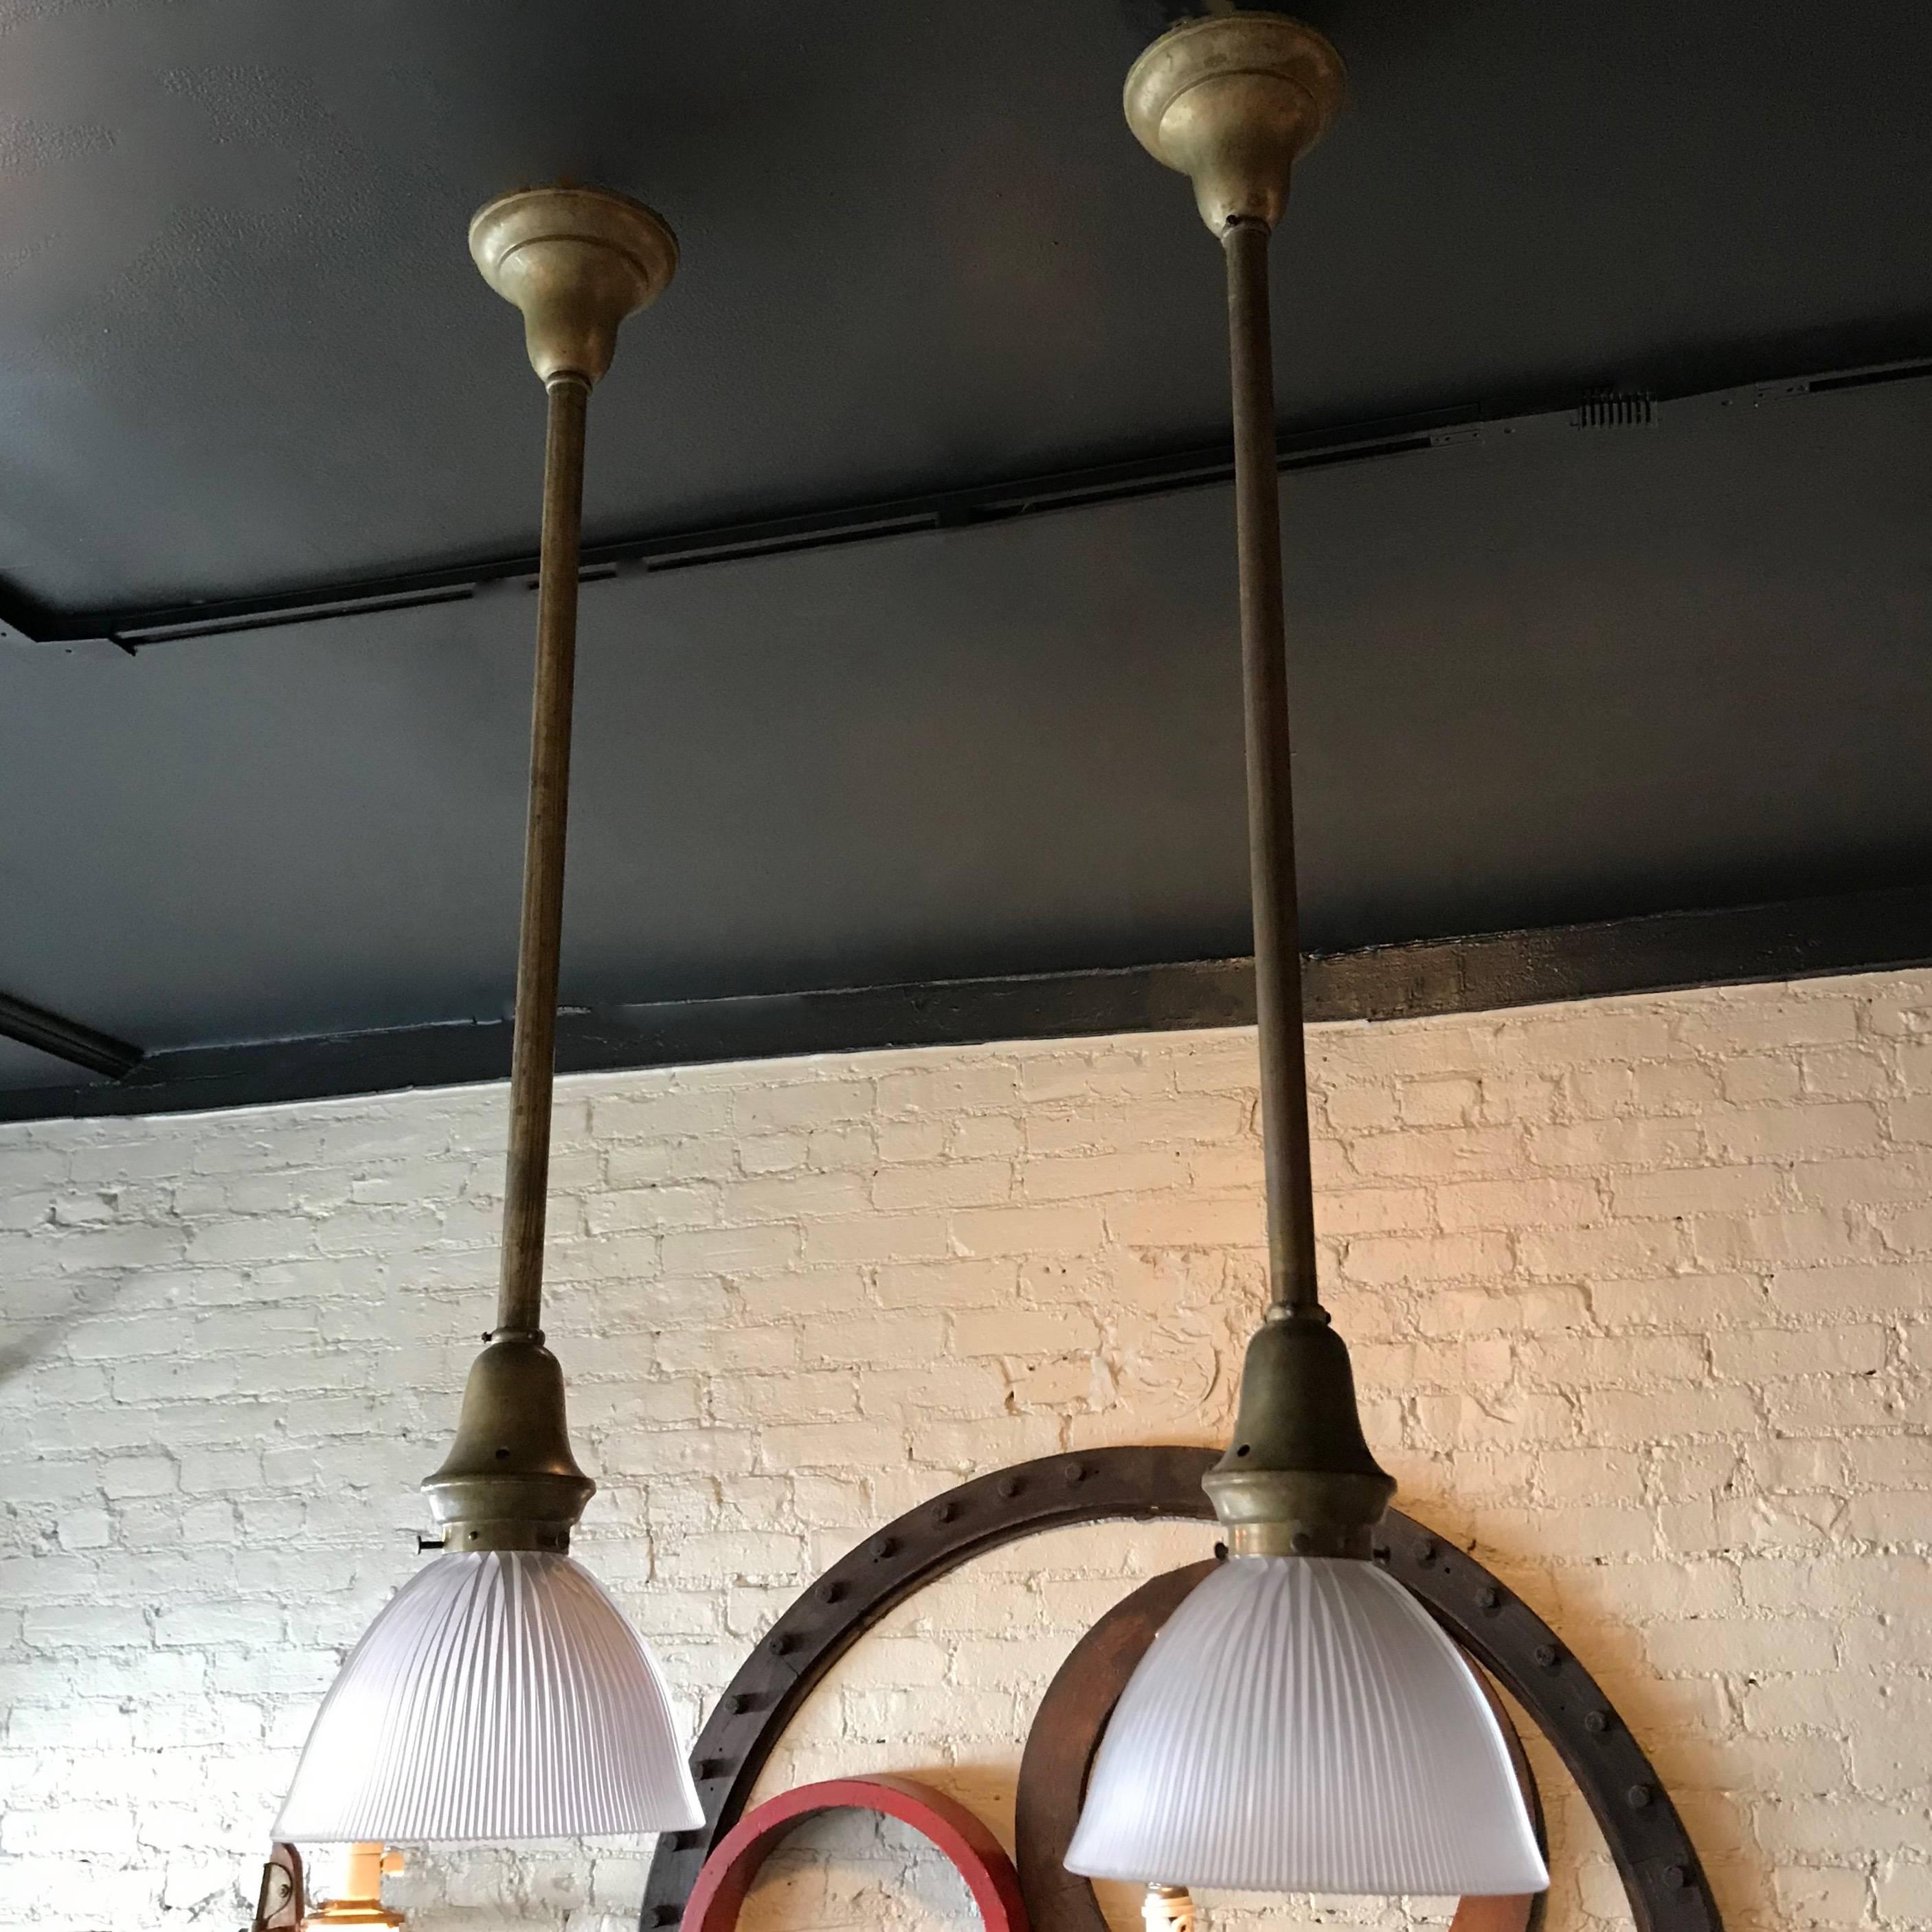 Early 20th century, industrial, factory pendant light feature deeply cut, prismatic Holophane dome shade with brass fitter on brass pole with matching canopy. The lamp is newly wired to accept a 200 watt bulb. The shade height is 5 inches. One